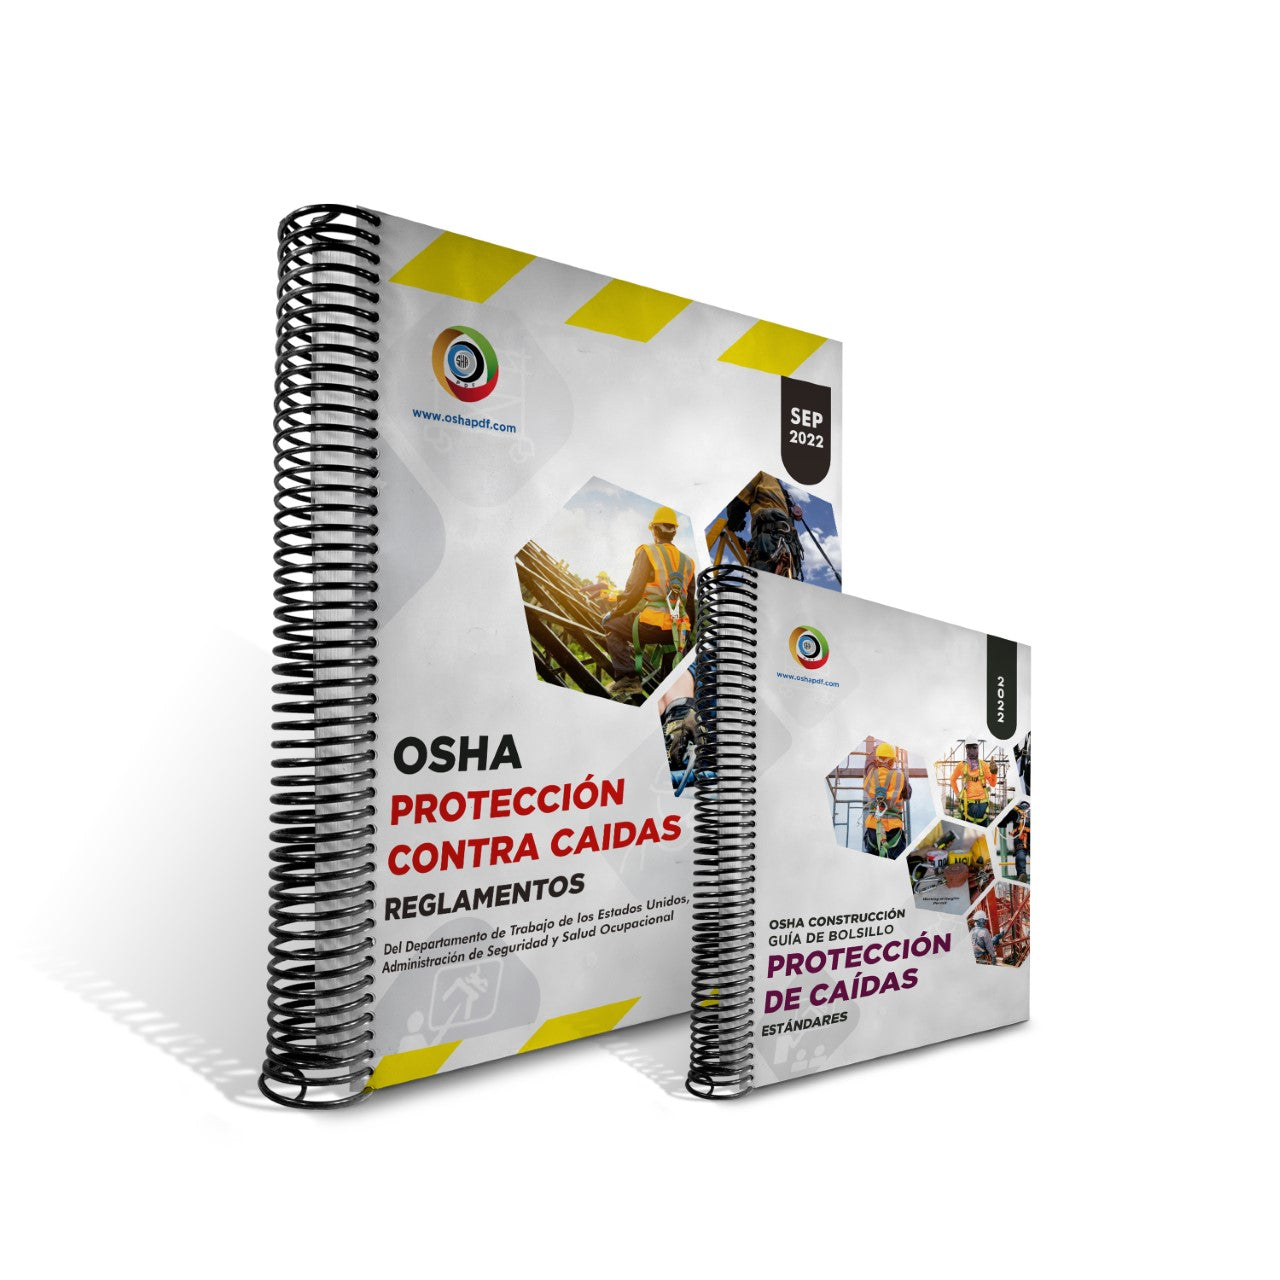 Spanish Fall Protection Regulations 2023 Book and Pocket Guide Combo